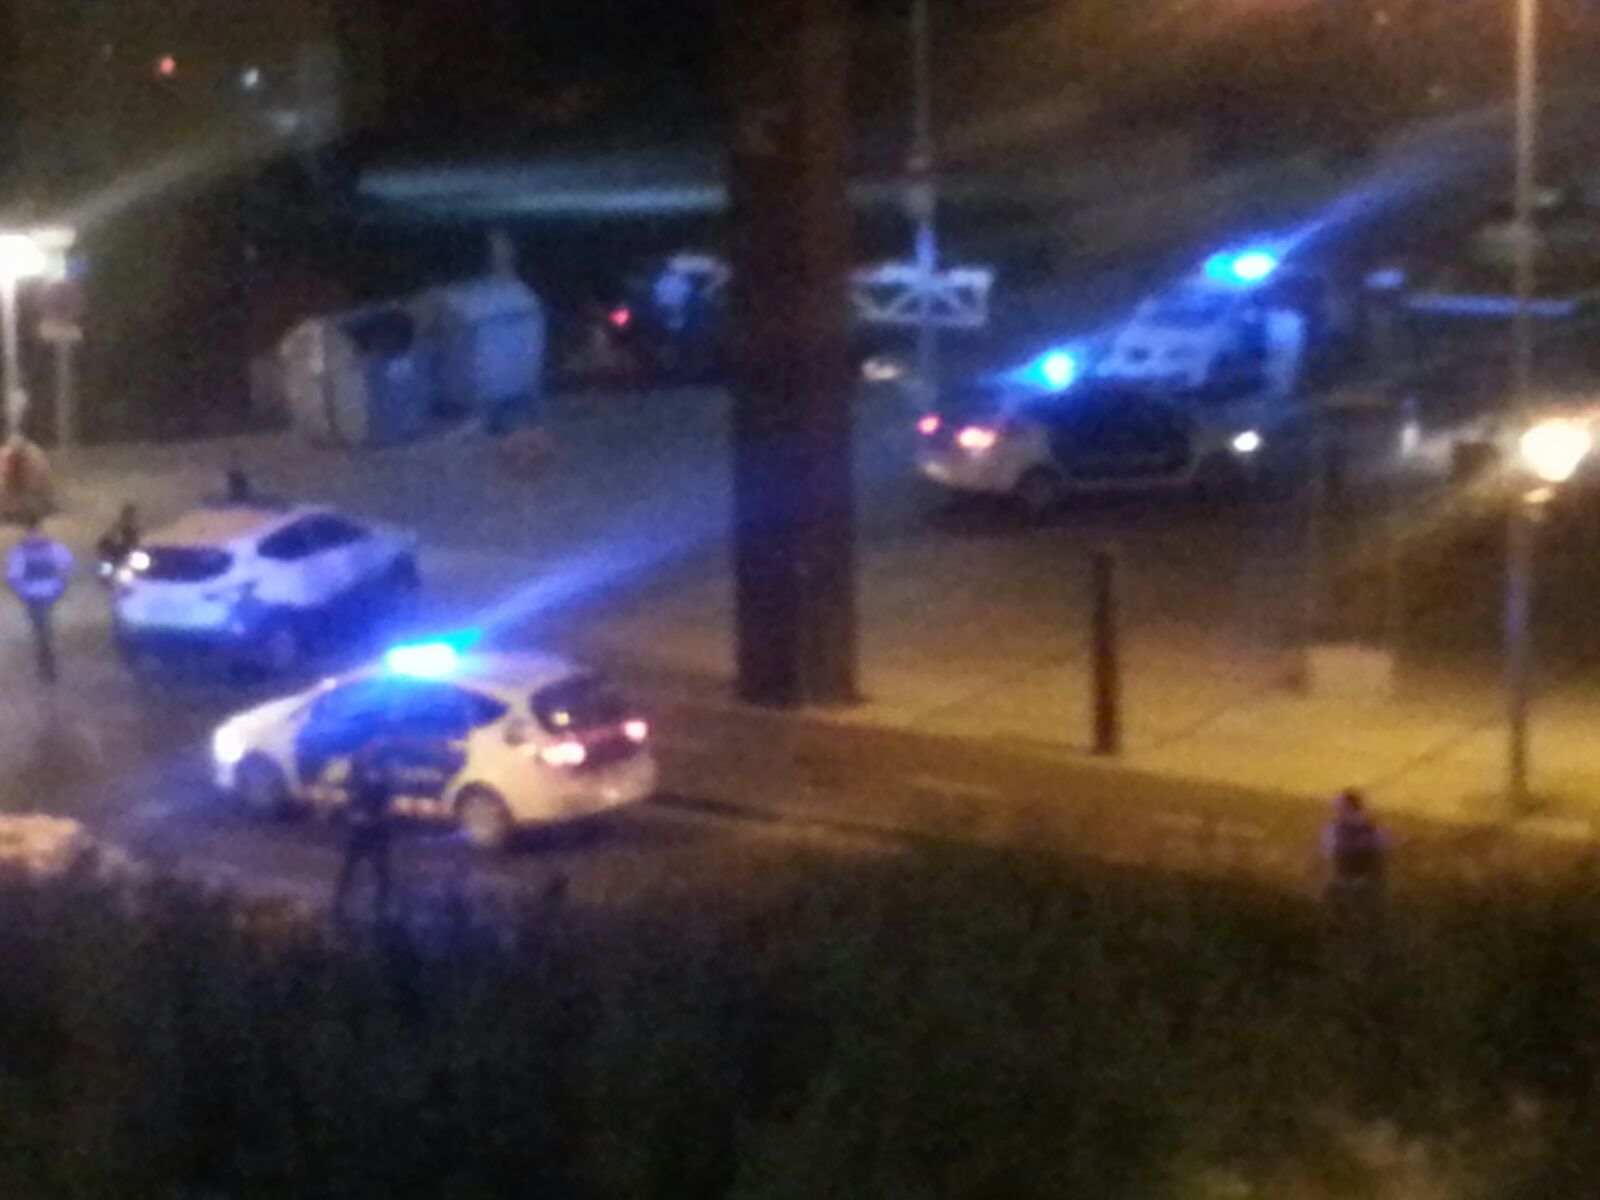 Five terrorists dead in shooting in Cambrils